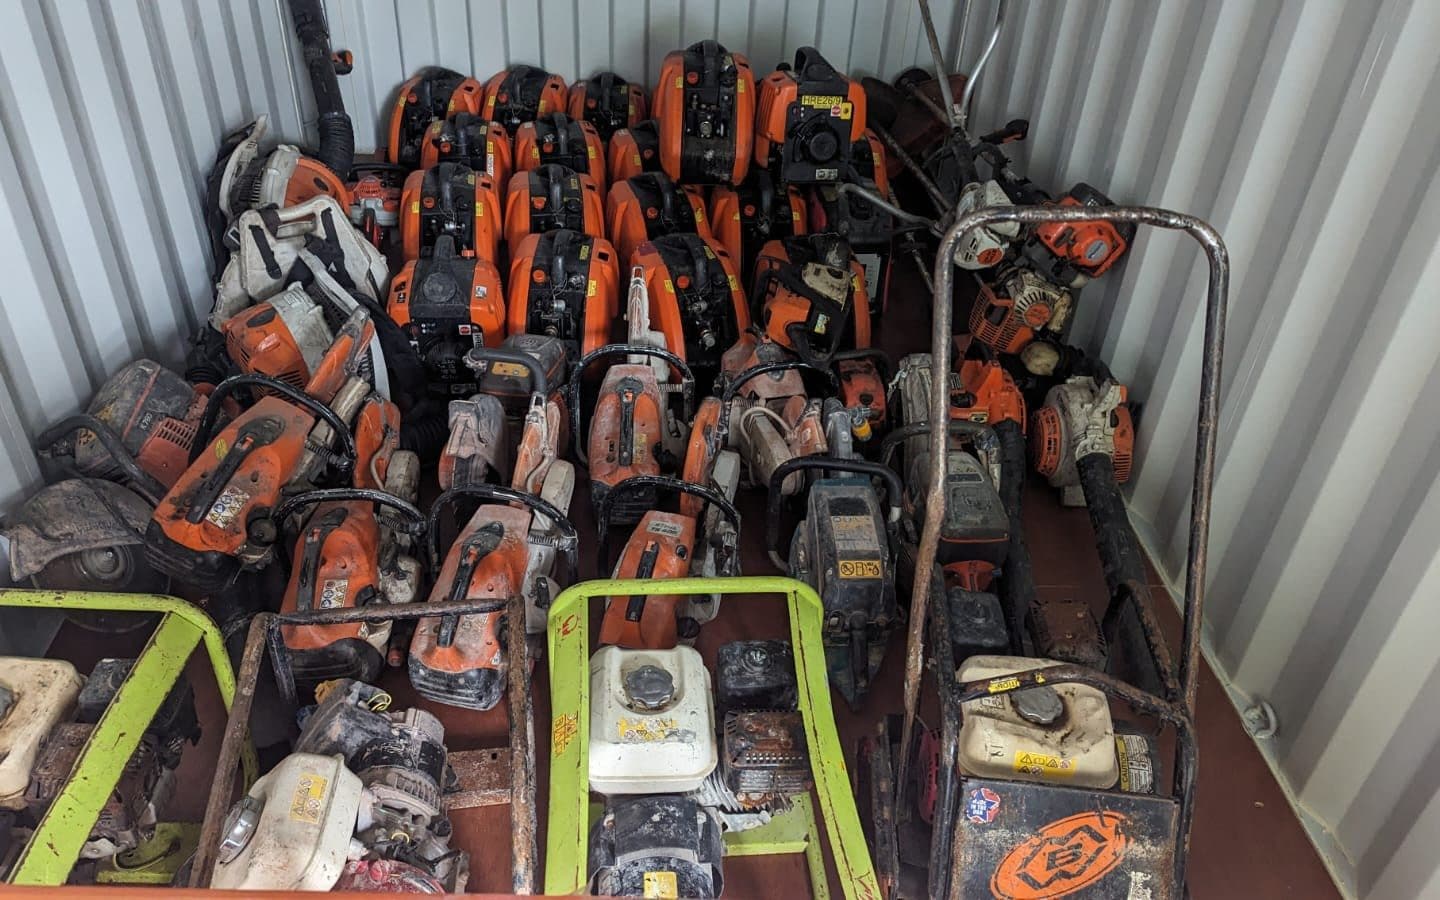 power tool with tracking device leads police to £500,000 hoard